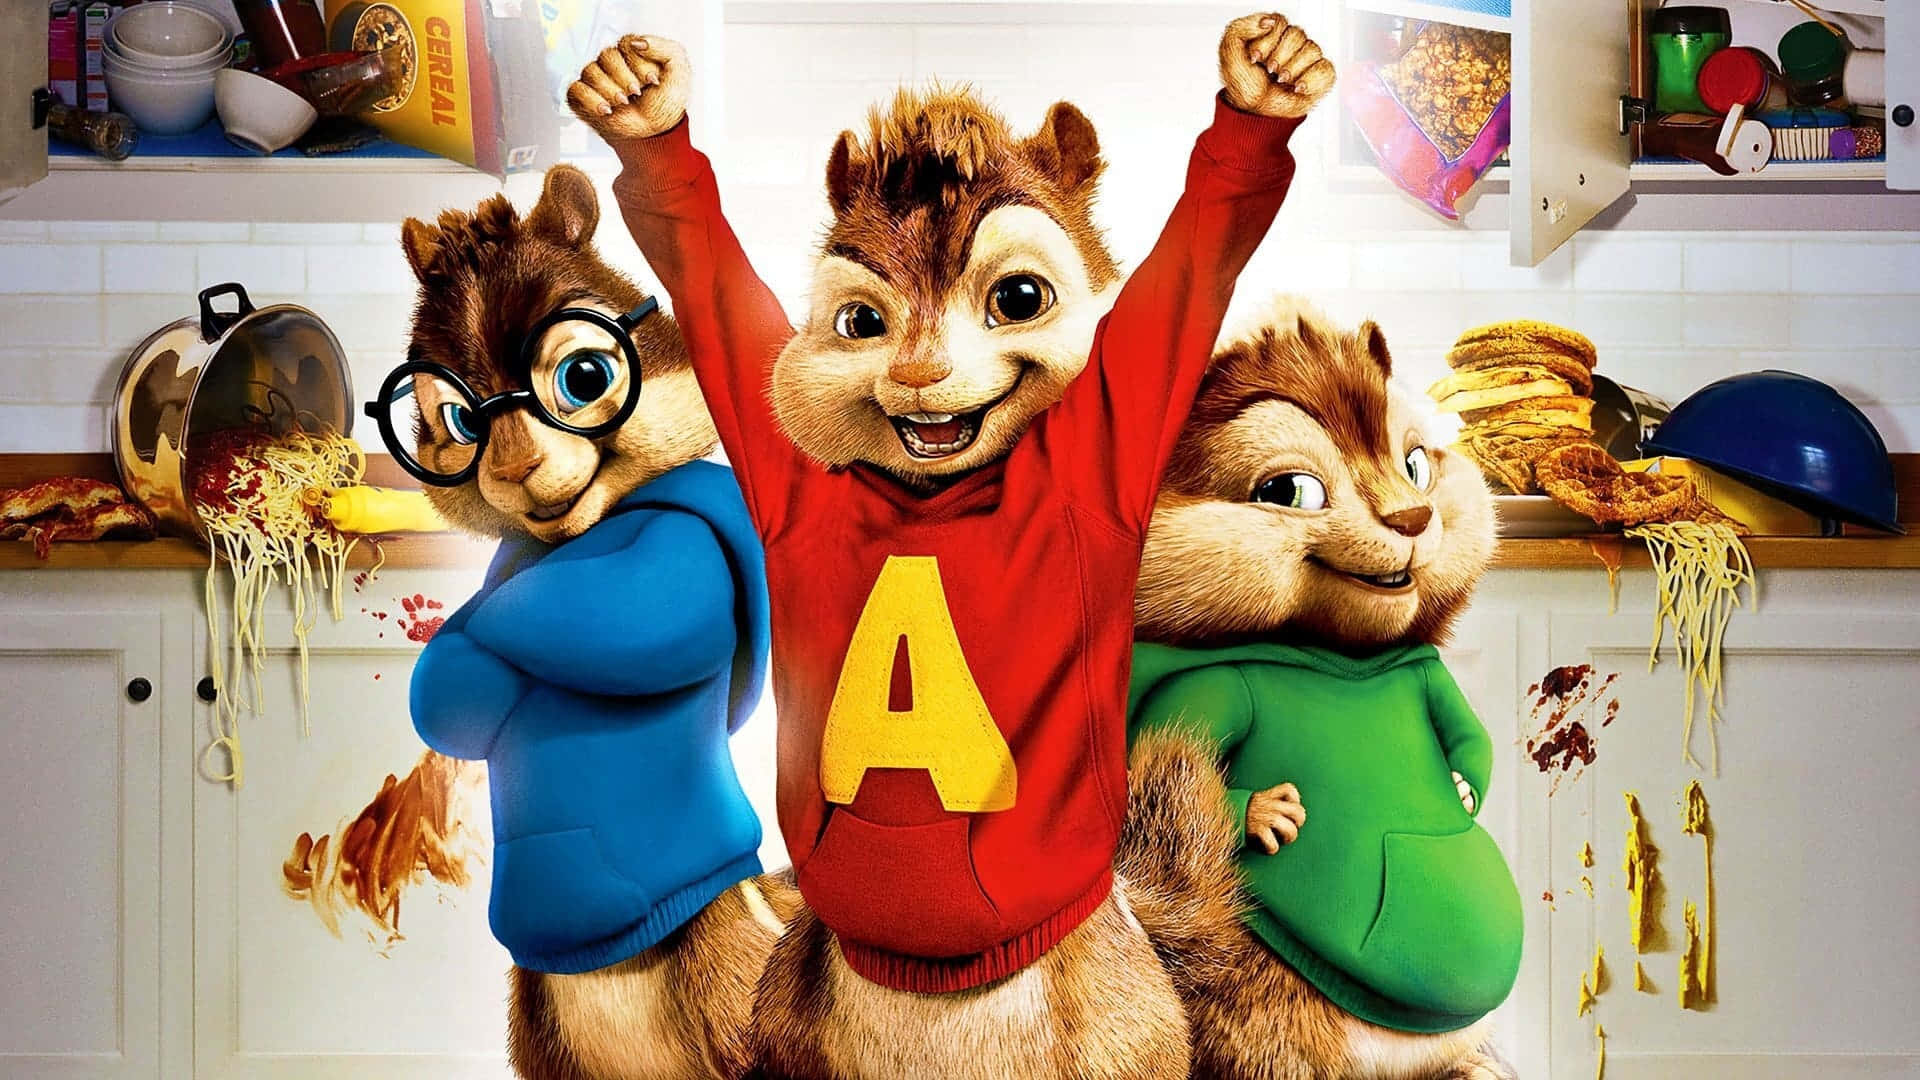 The Glorious Return of Alvin and the Chipmunks!